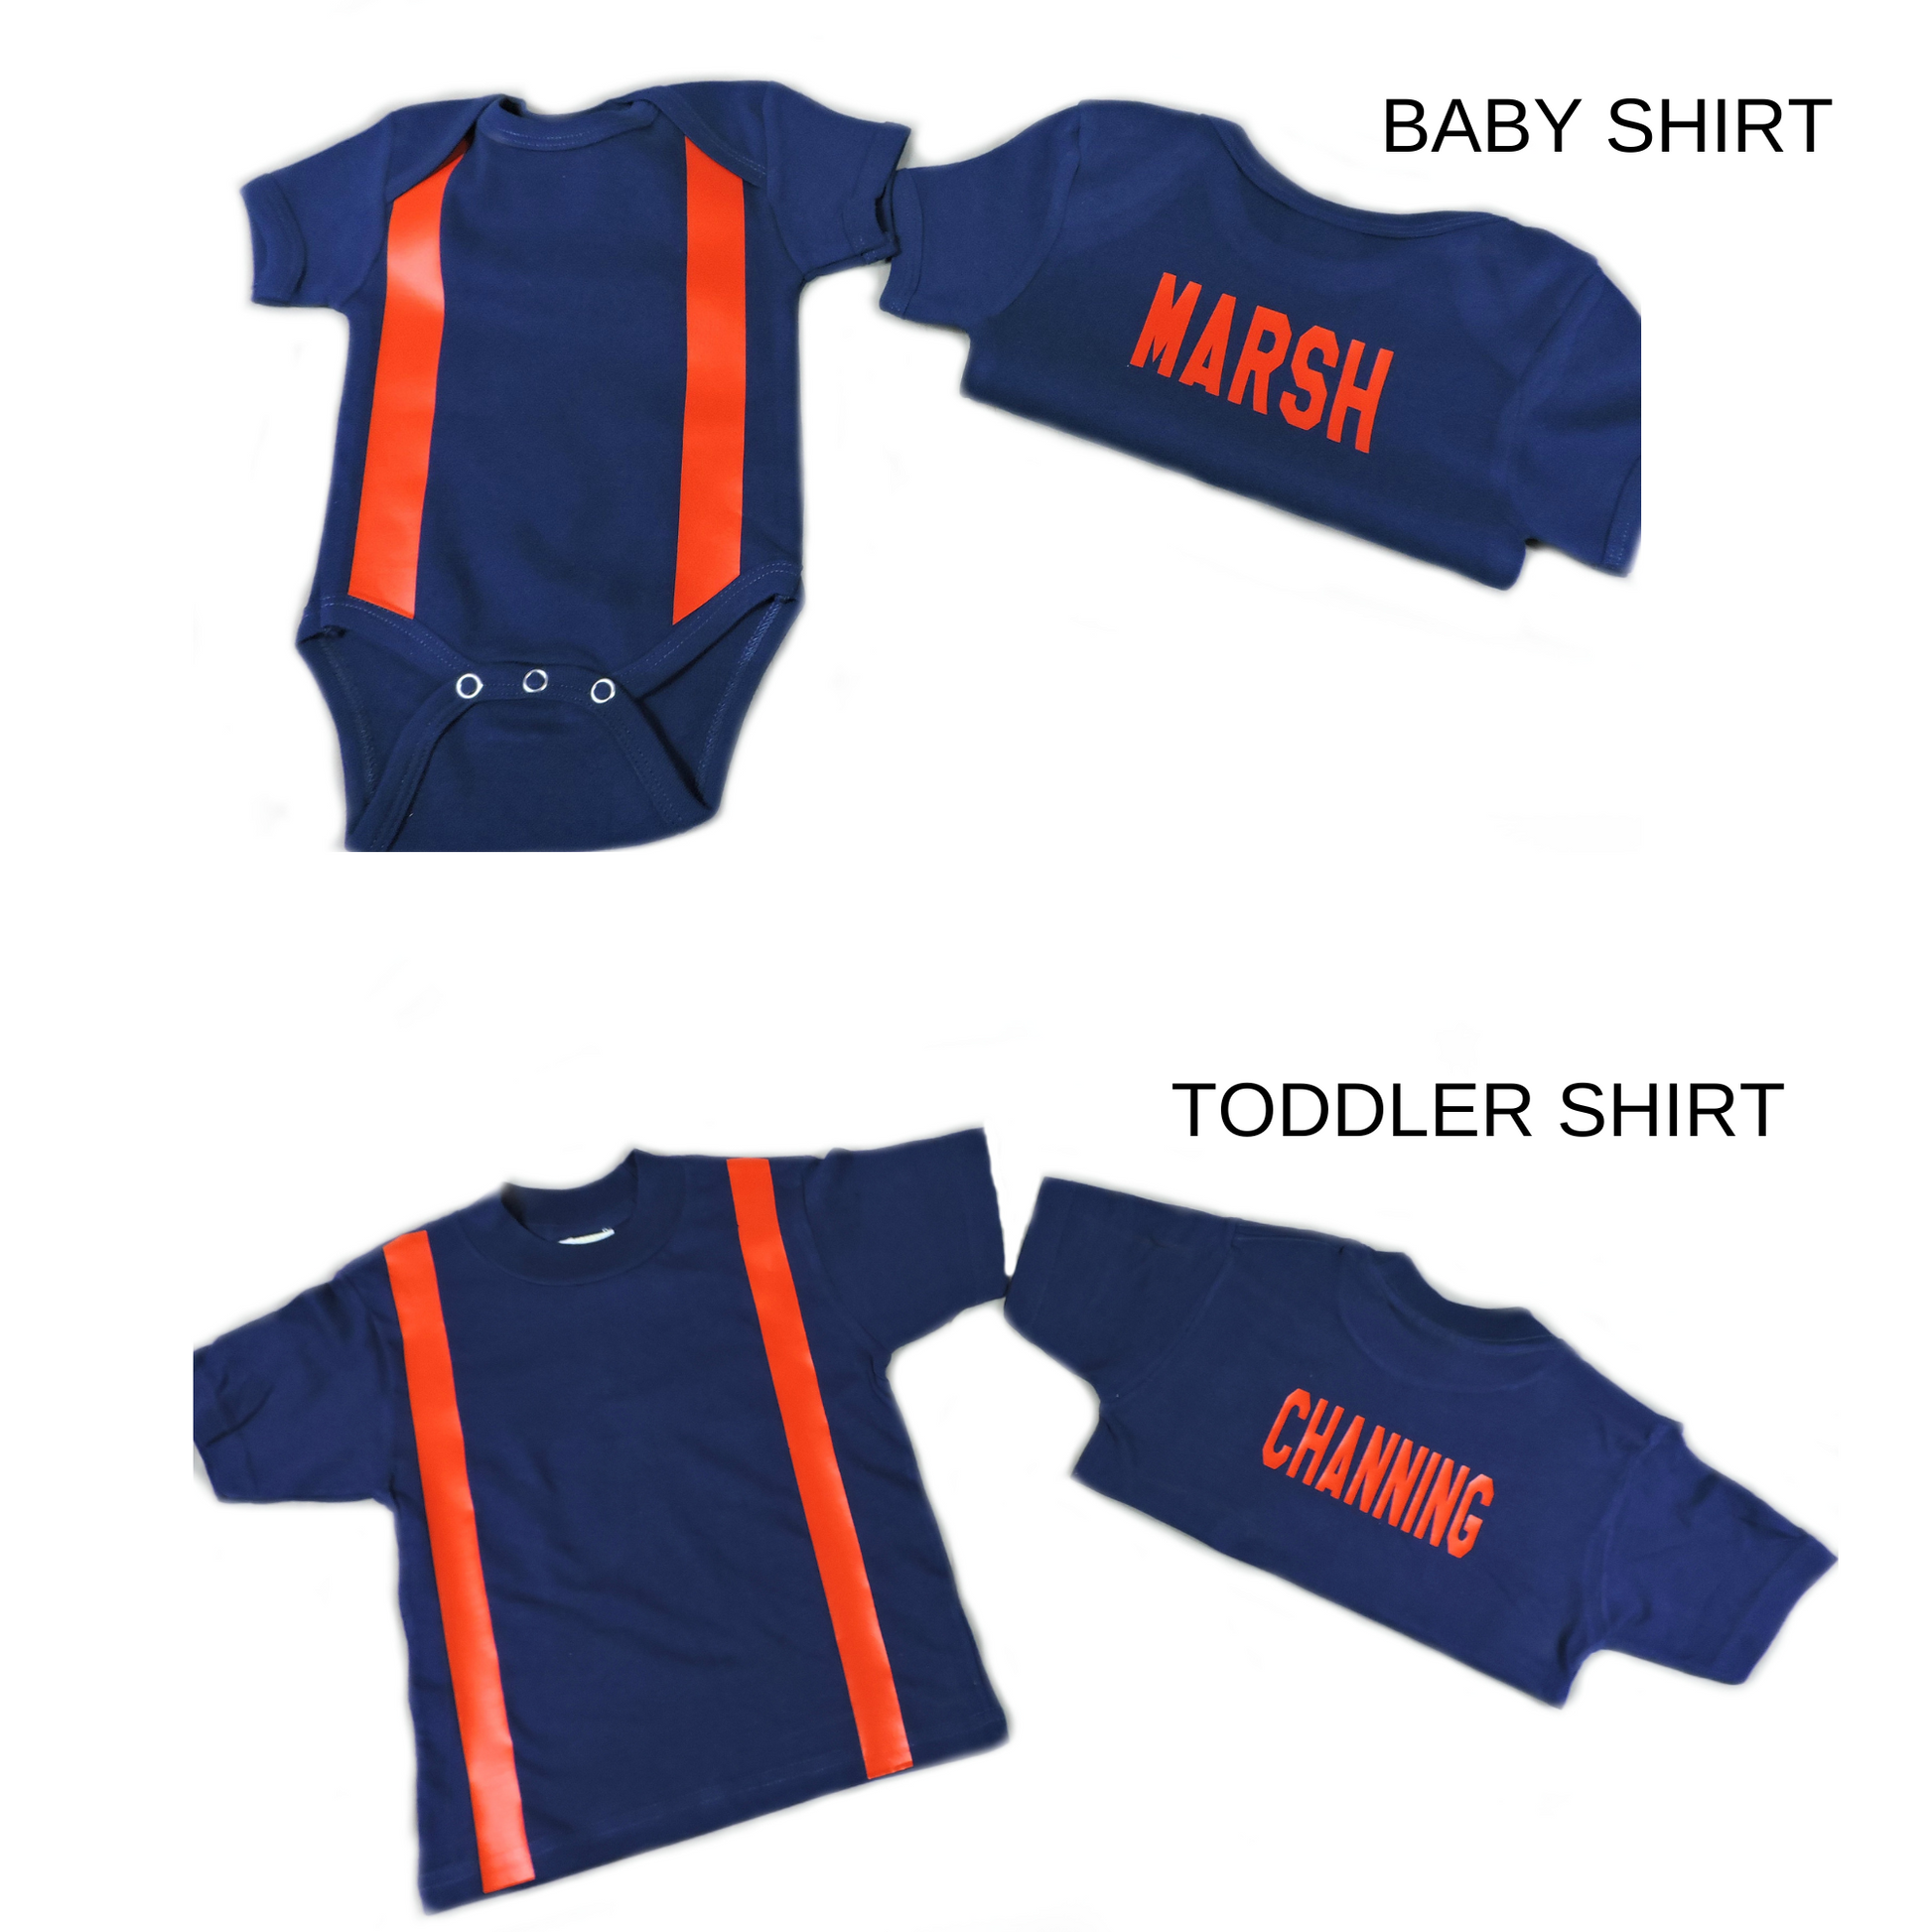 Blue With Suspenders Firefighter style baby And Toddler shirts